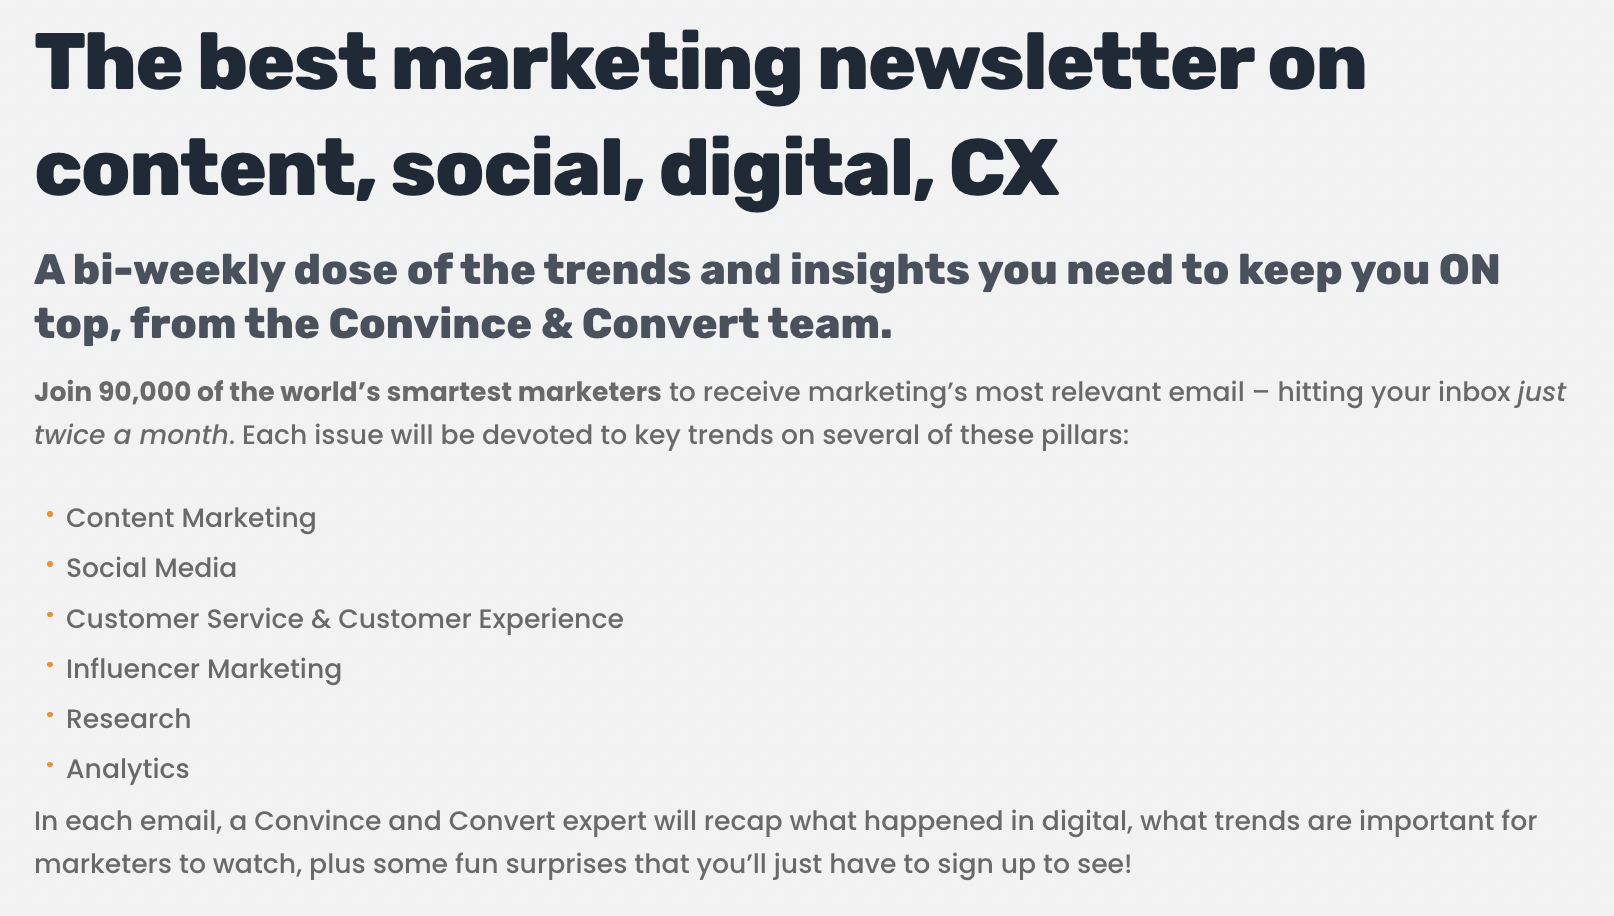 Screenshot of a newsletter signup call to action from Convince & Convert.